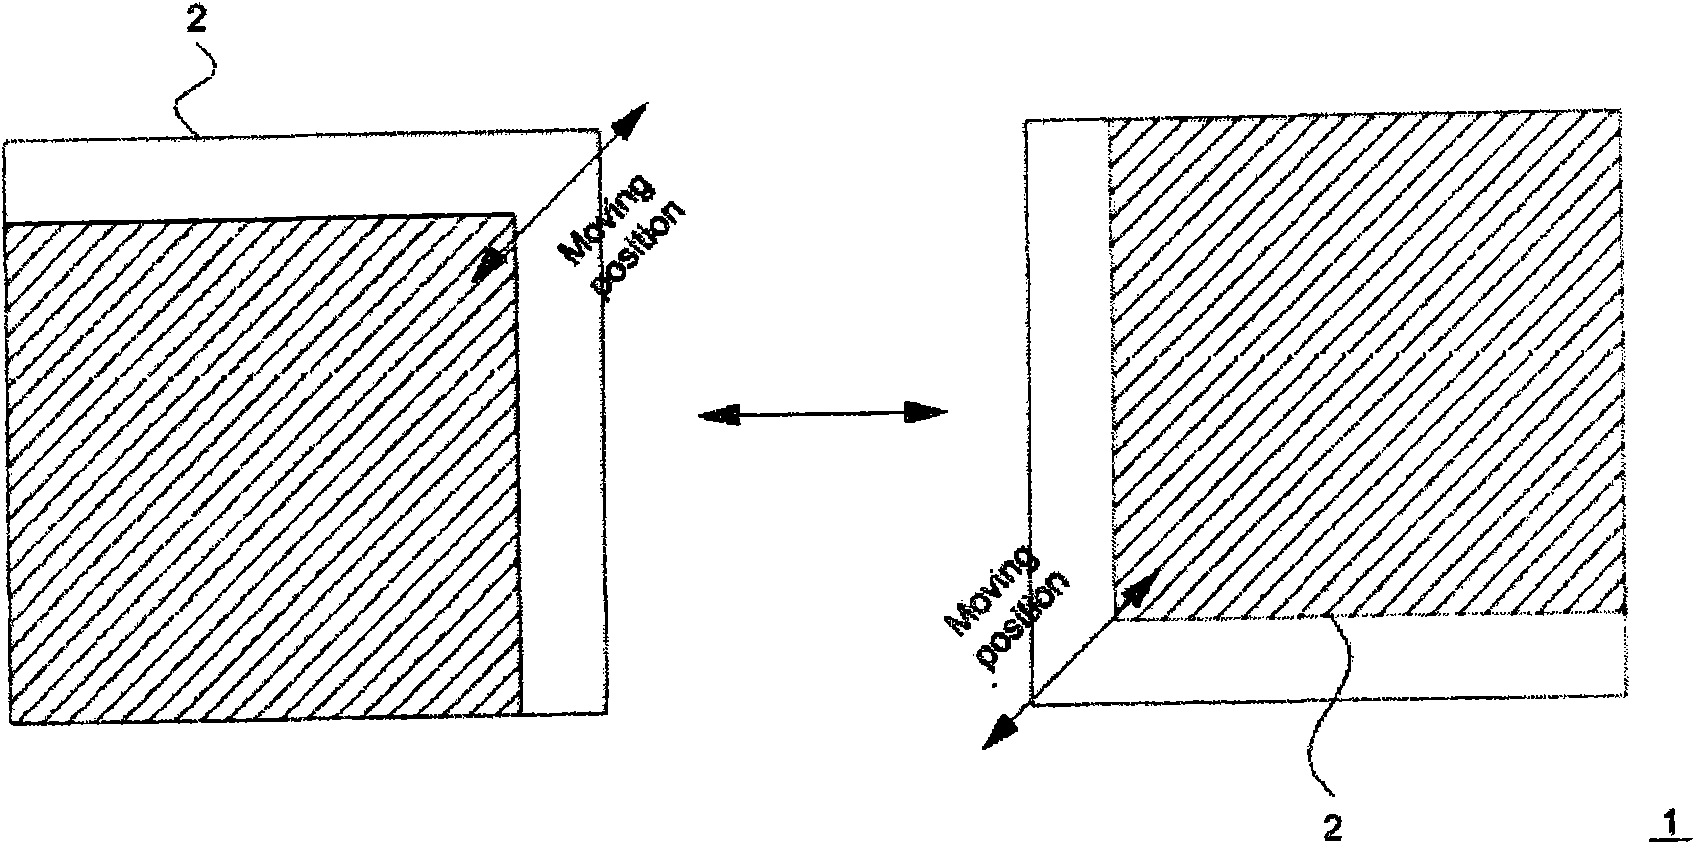 Liquid crystal display device and method for improving picture flash and image persistence